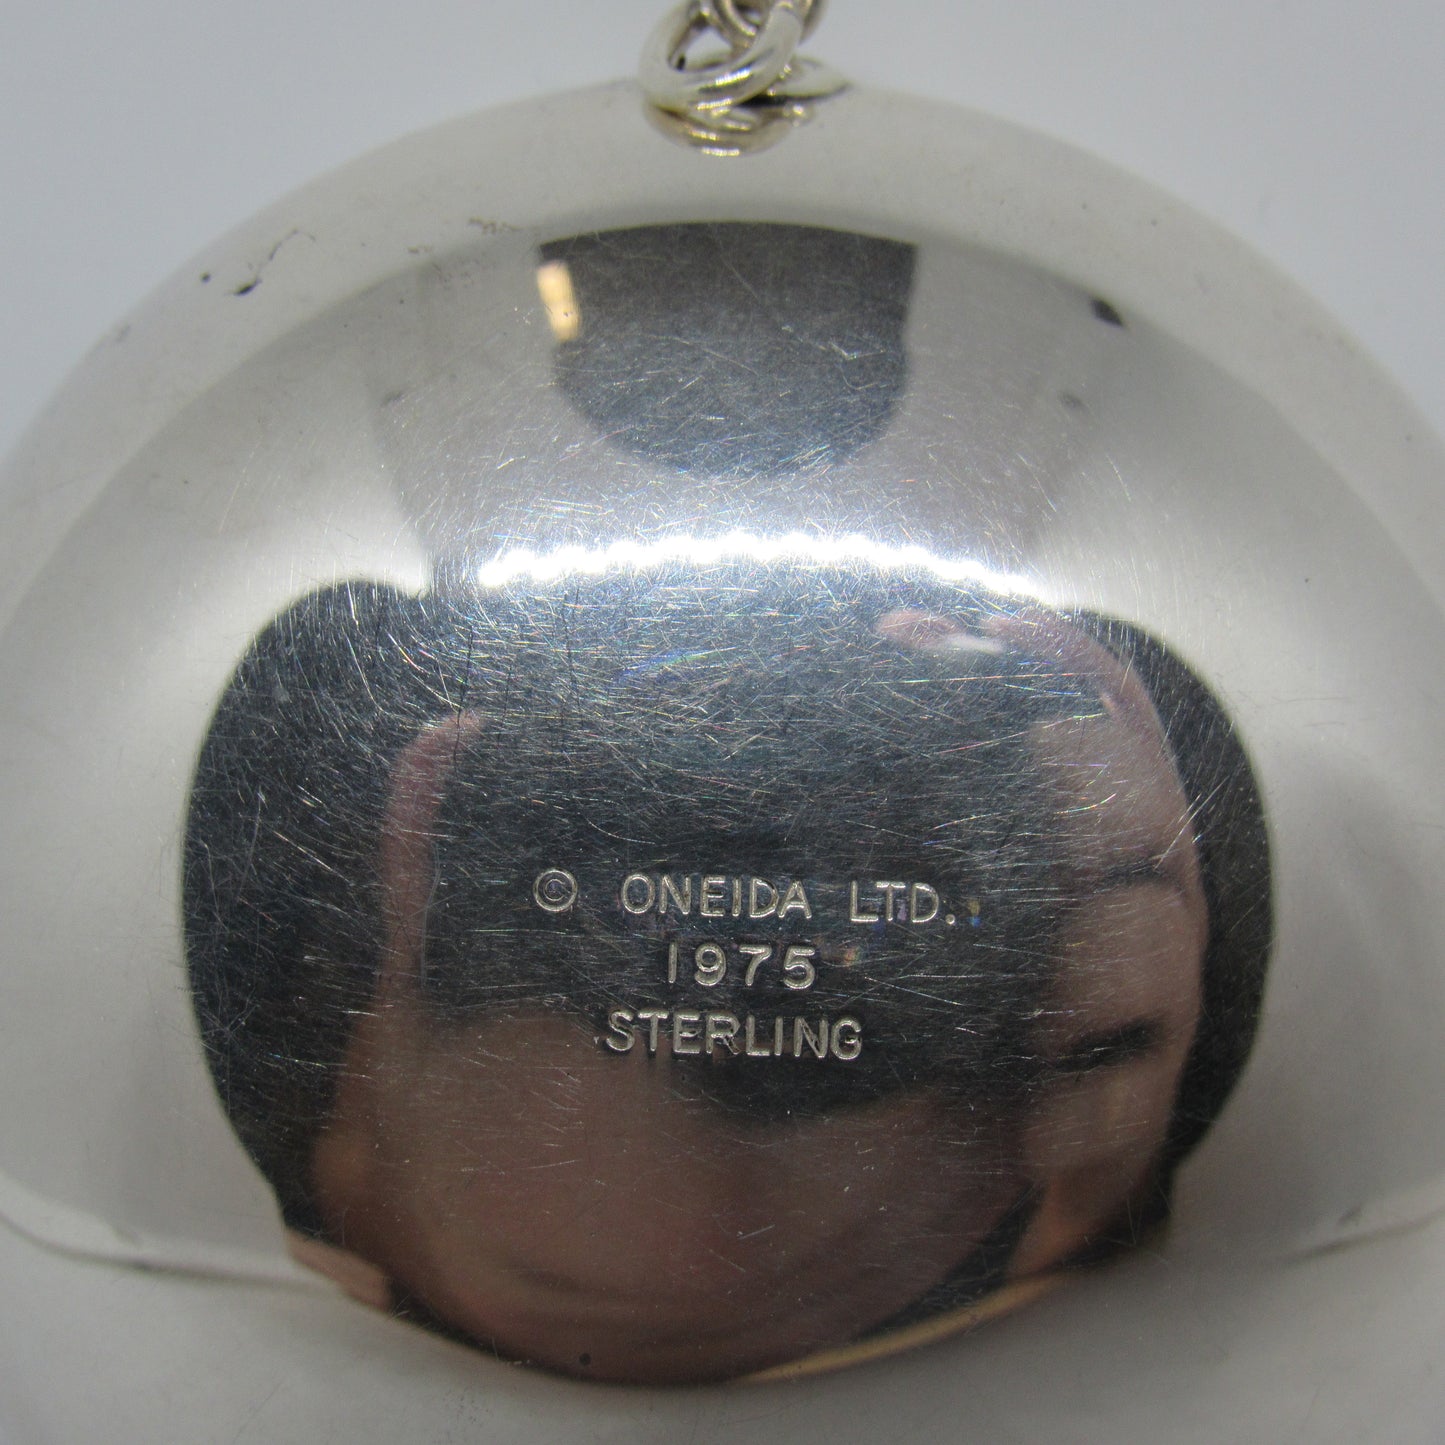 Oneida 1975 Sterling Silver "The Magi" Ornament Hand Chased